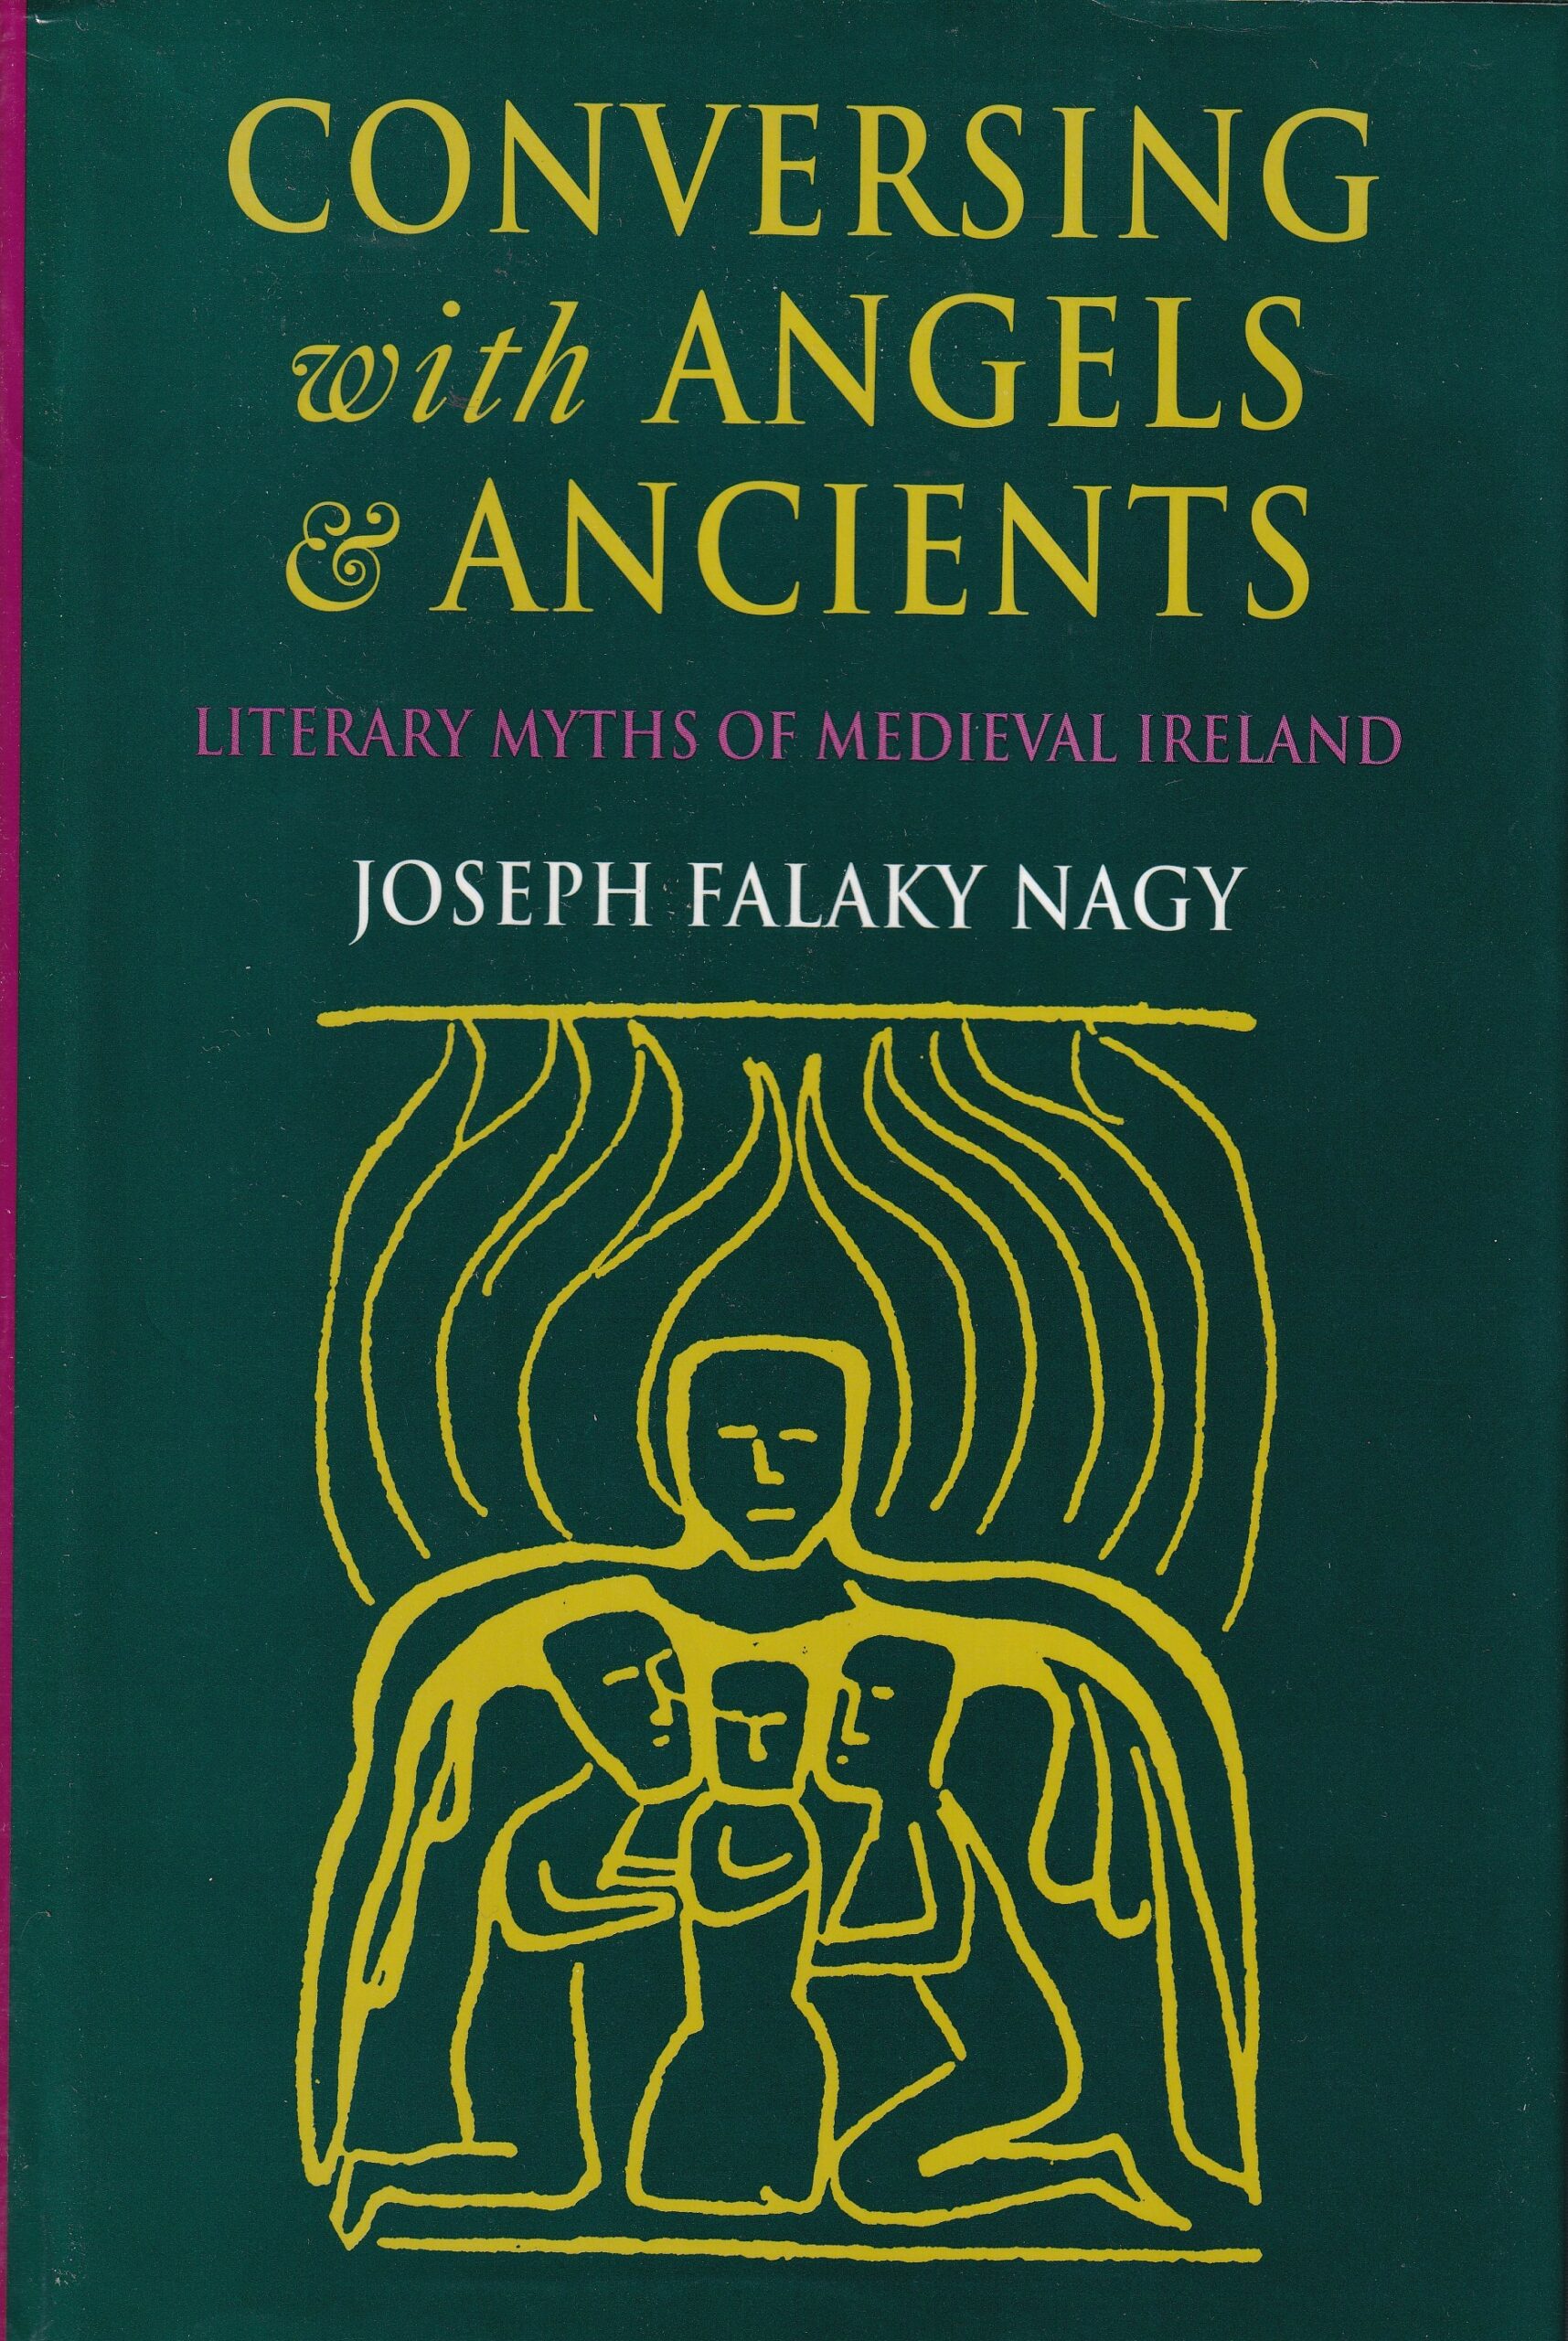 Conversing with Angels and Ancients: Literary Myths of Medieval Ireland | Joseph Falaky Nagy | Charlie Byrne's